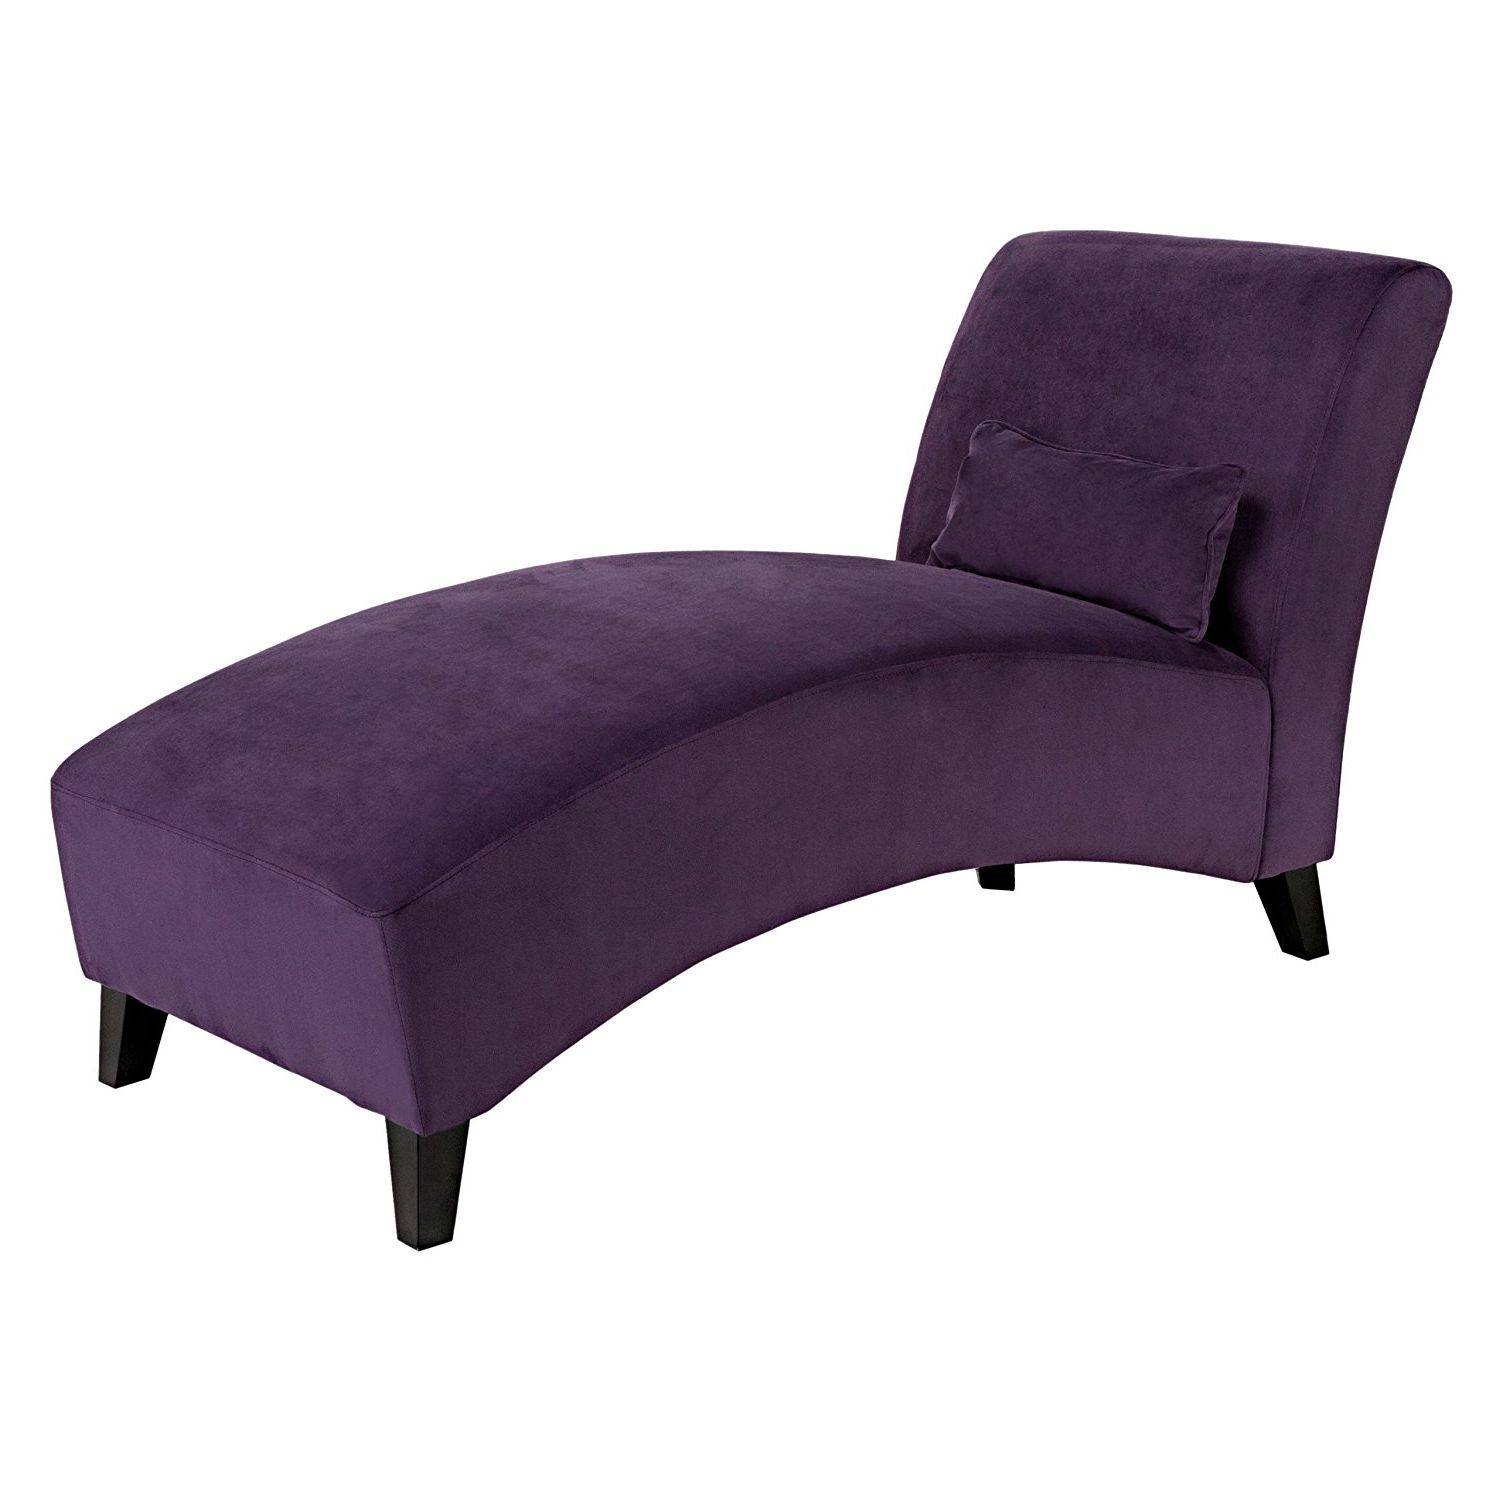 Amazon: Handy Living Chaise Lounge Chair, Purple: Kitchen & Dining Throughout Widely Used Chaise Lounge Chairs (View 11 of 15)